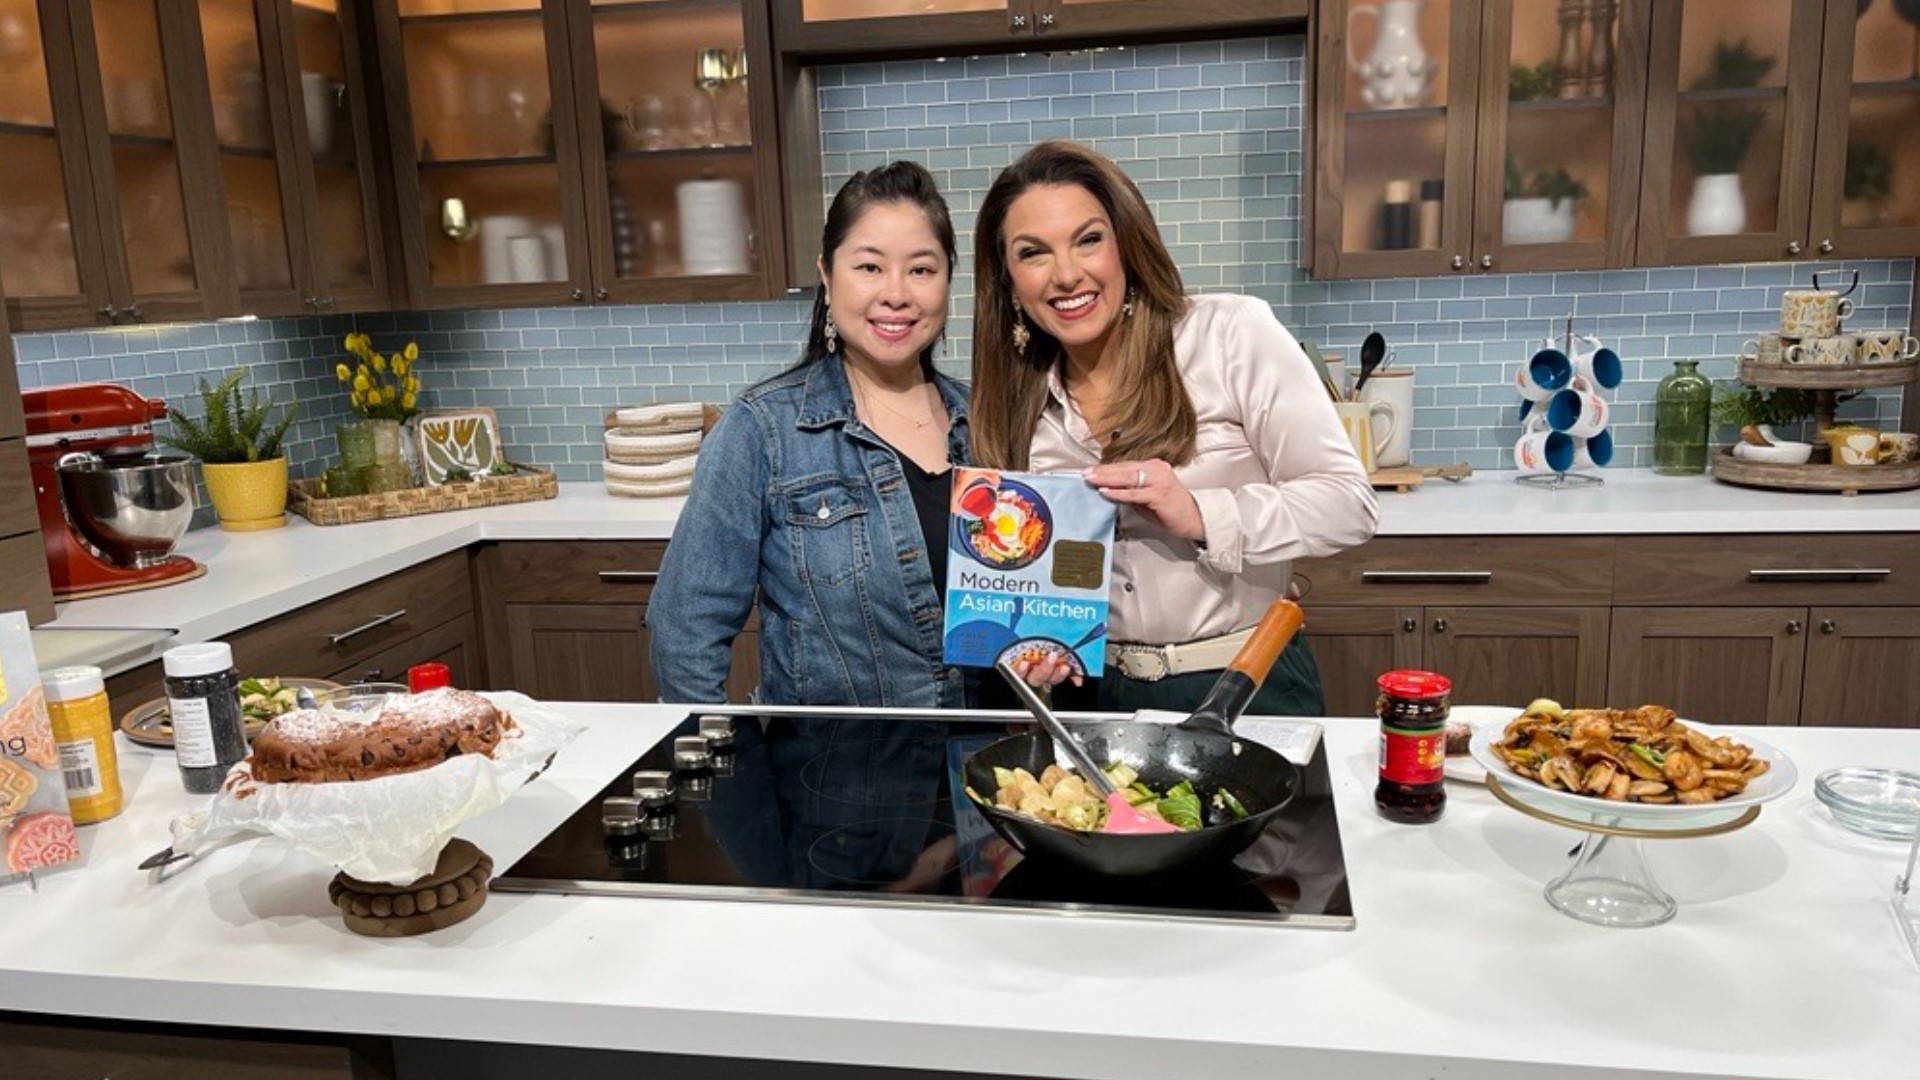 Lieu teaches Amity how to make a dish from her new cookbook "Modern Asian Cooking" which comes out today! #newdaynw